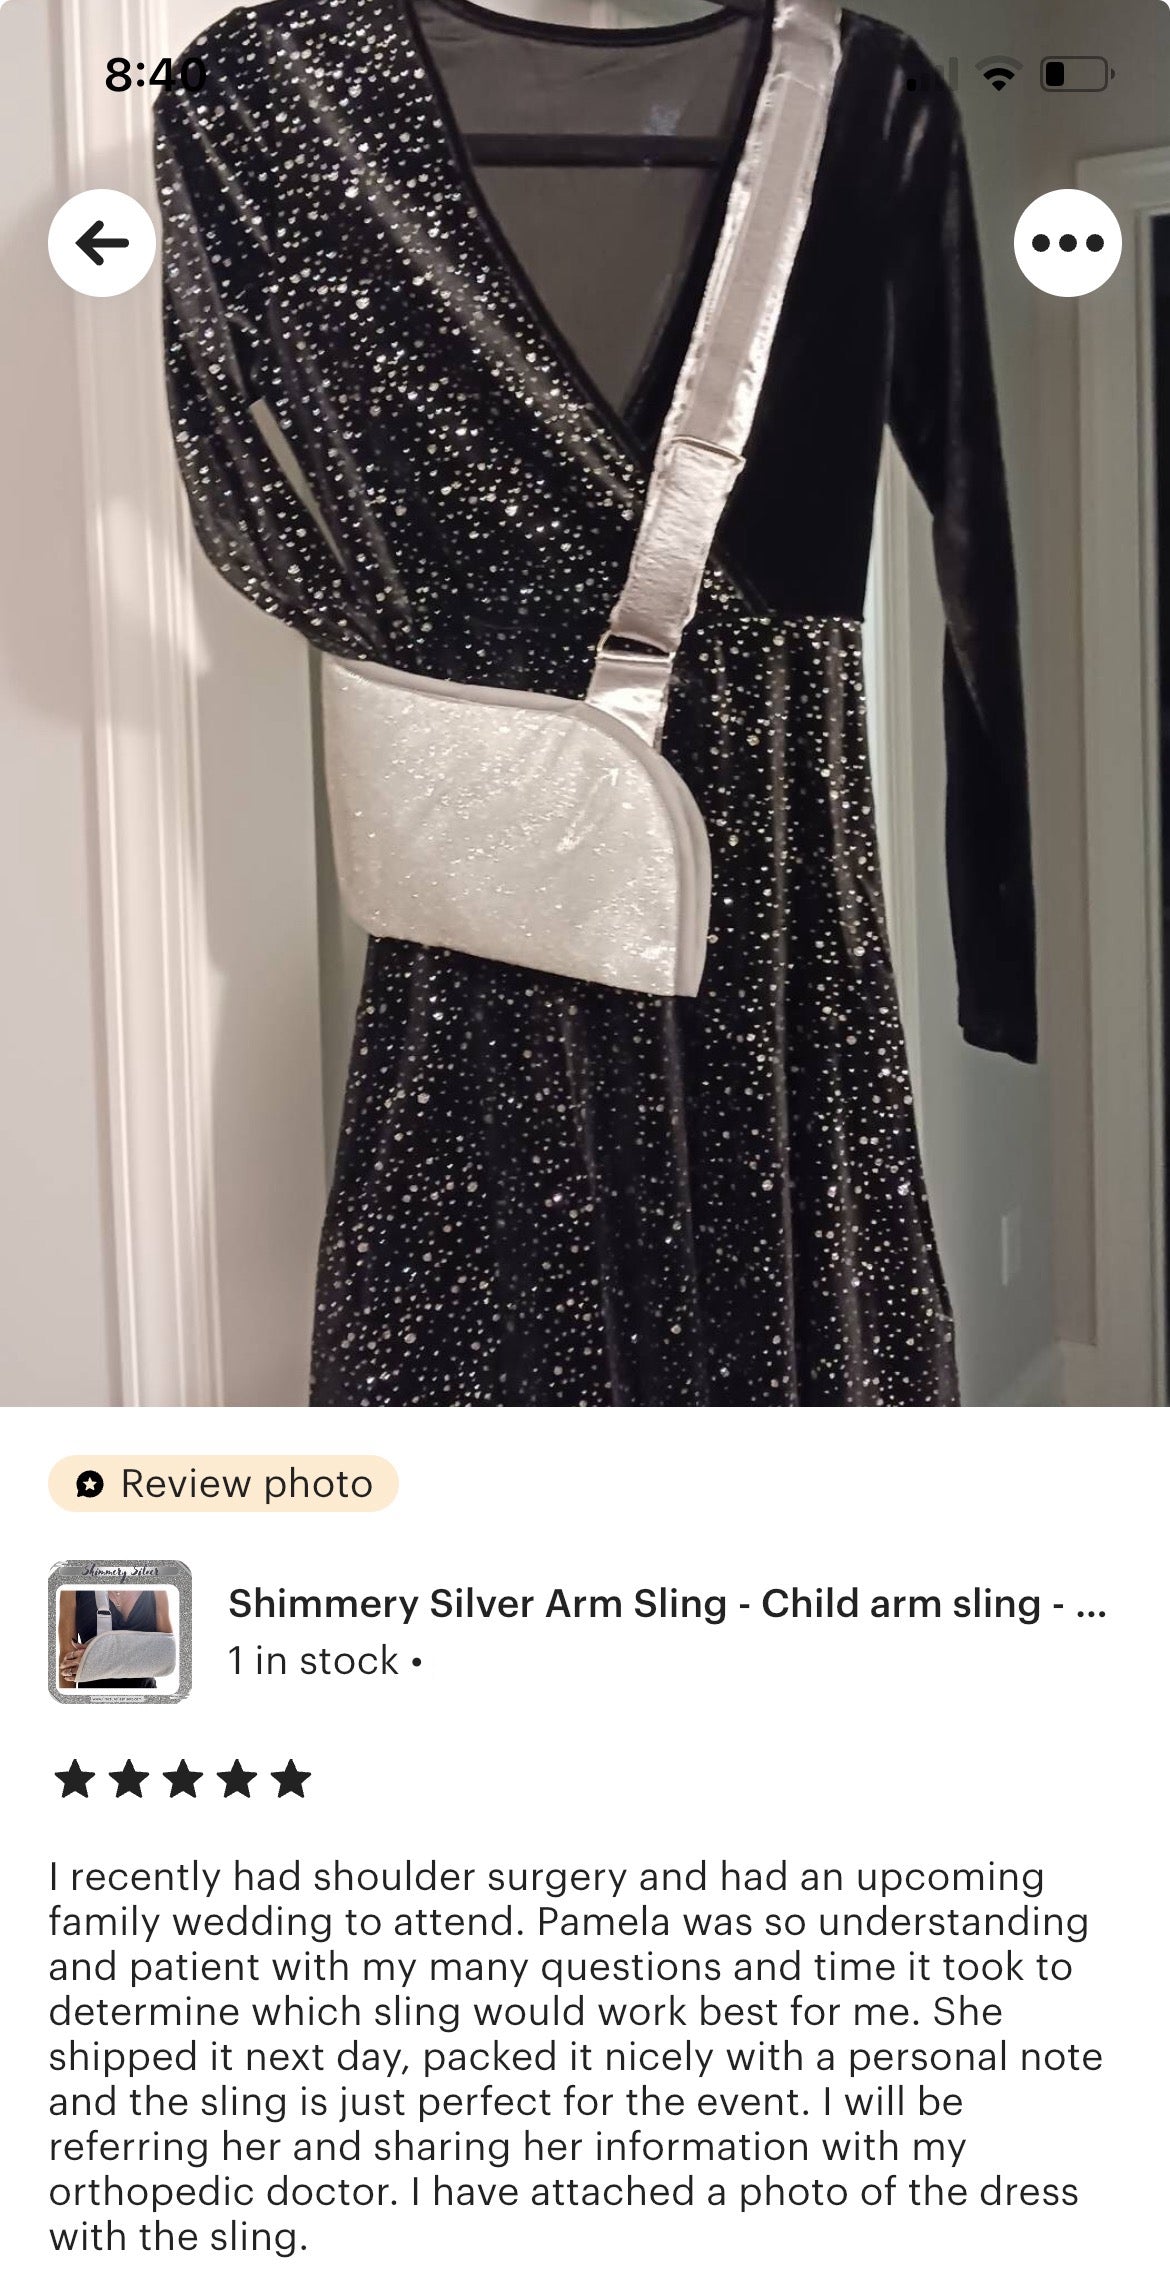 Shimmery Silver Arm Sling